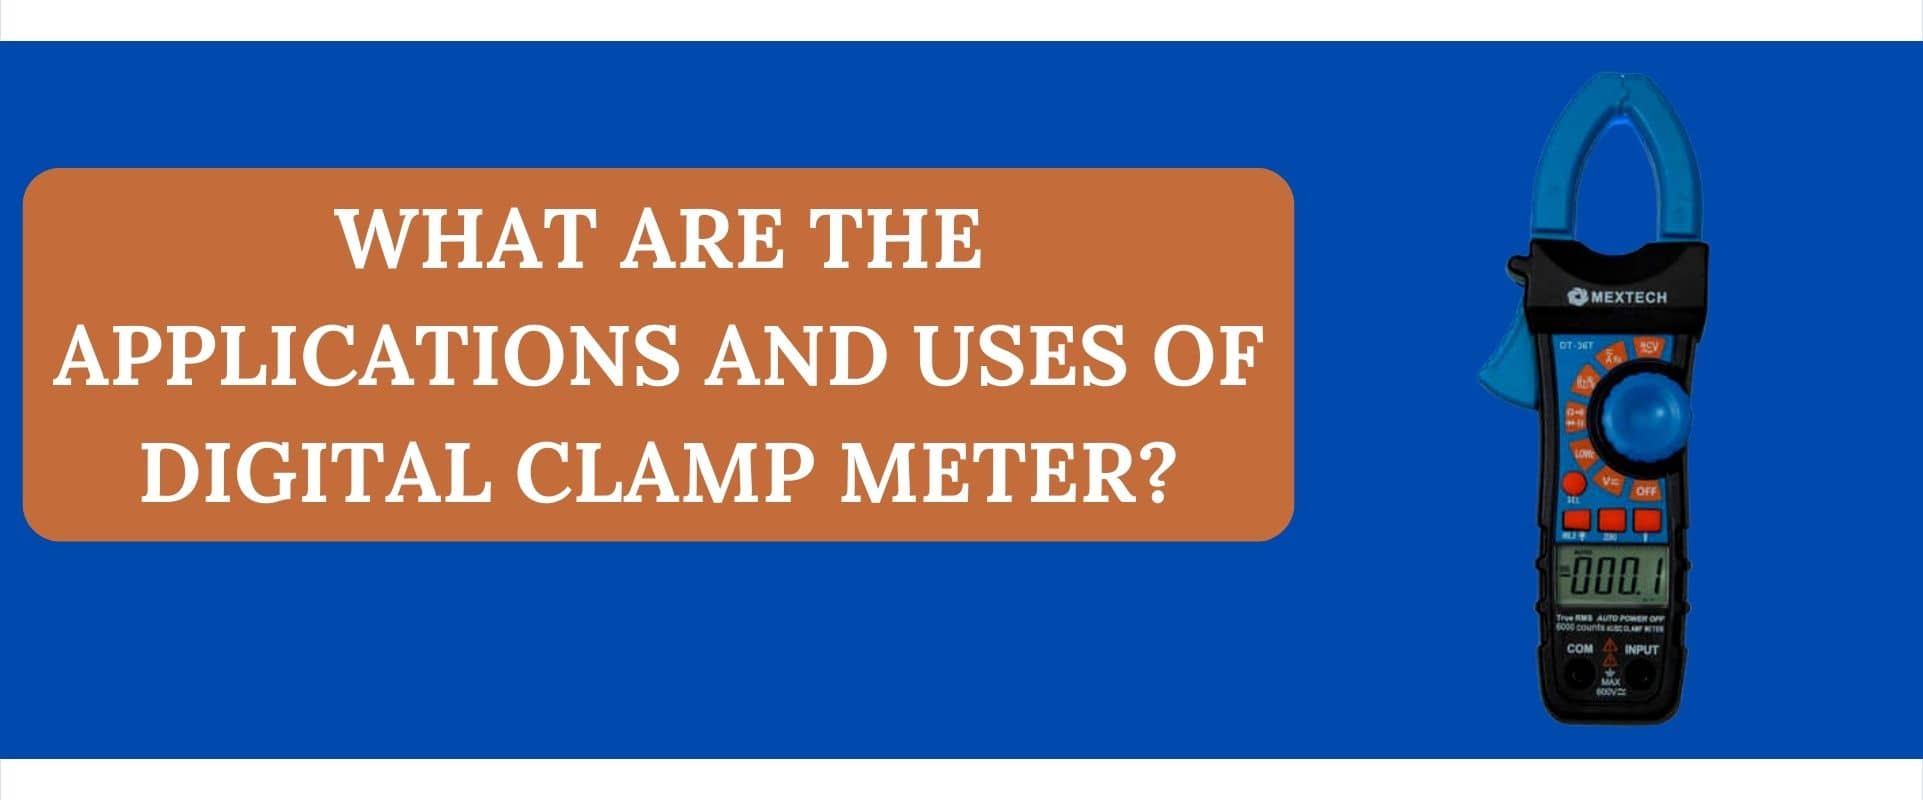 Applications and Uses of Digital Clamp Meter